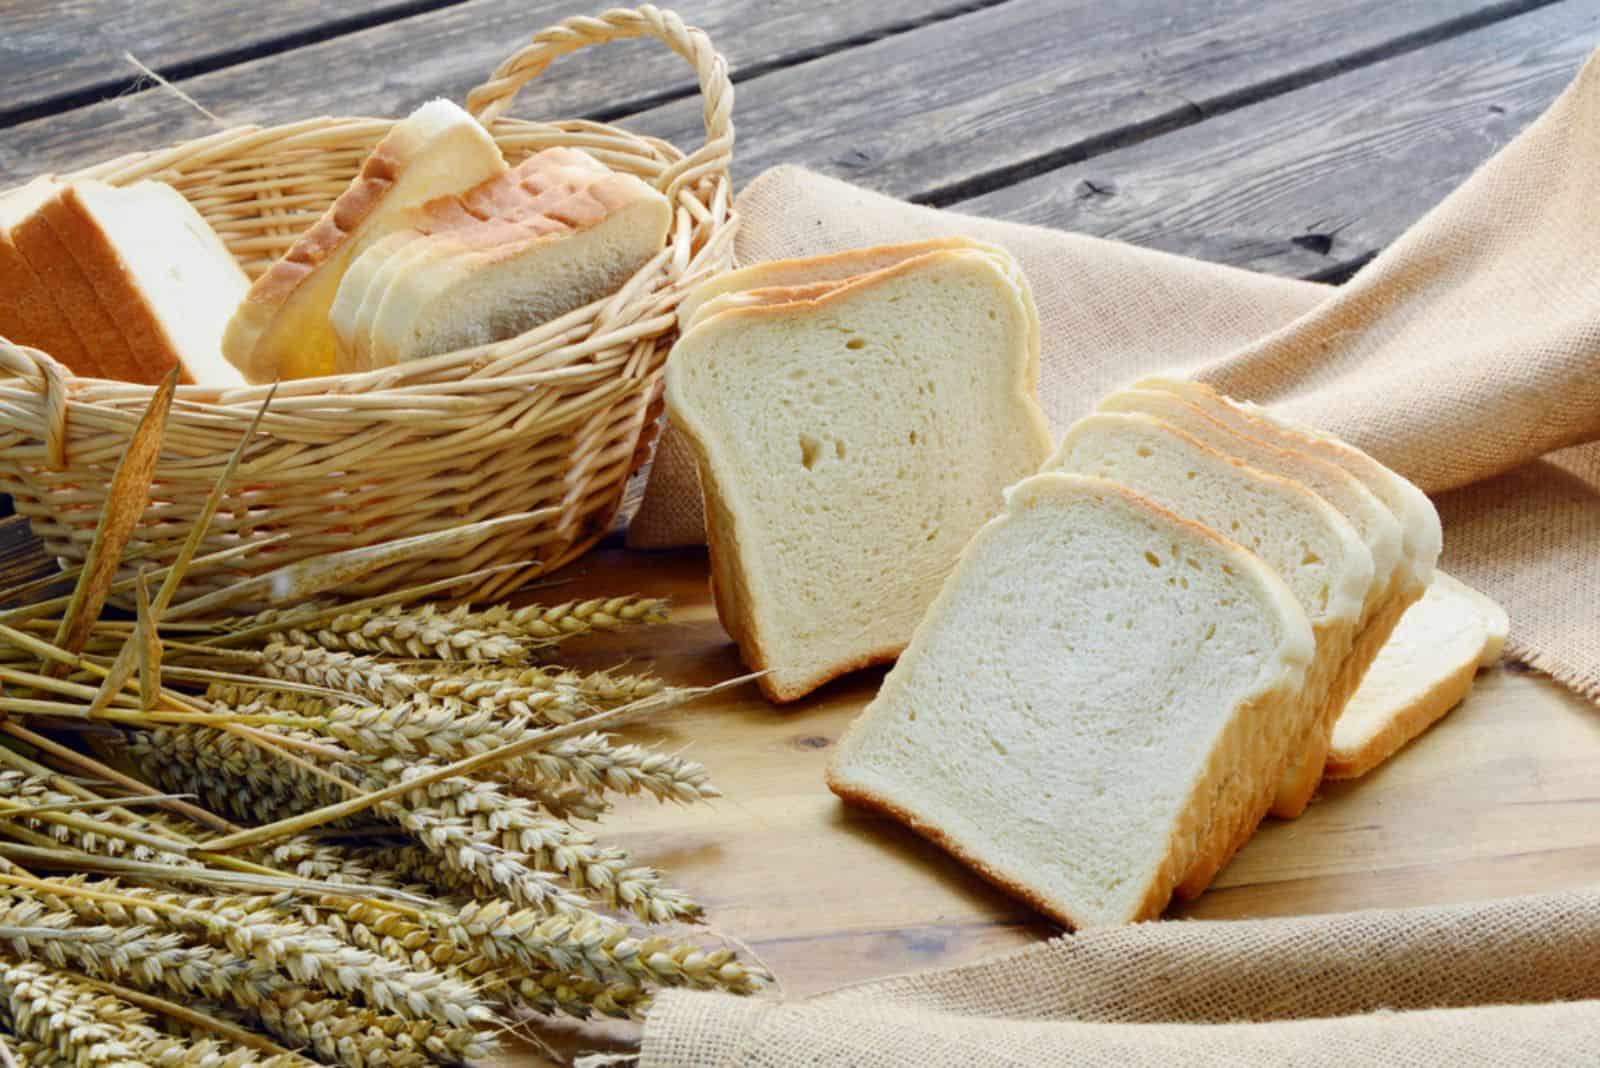 white bread or sliced bread in the basket on wooden floor with sack cloths